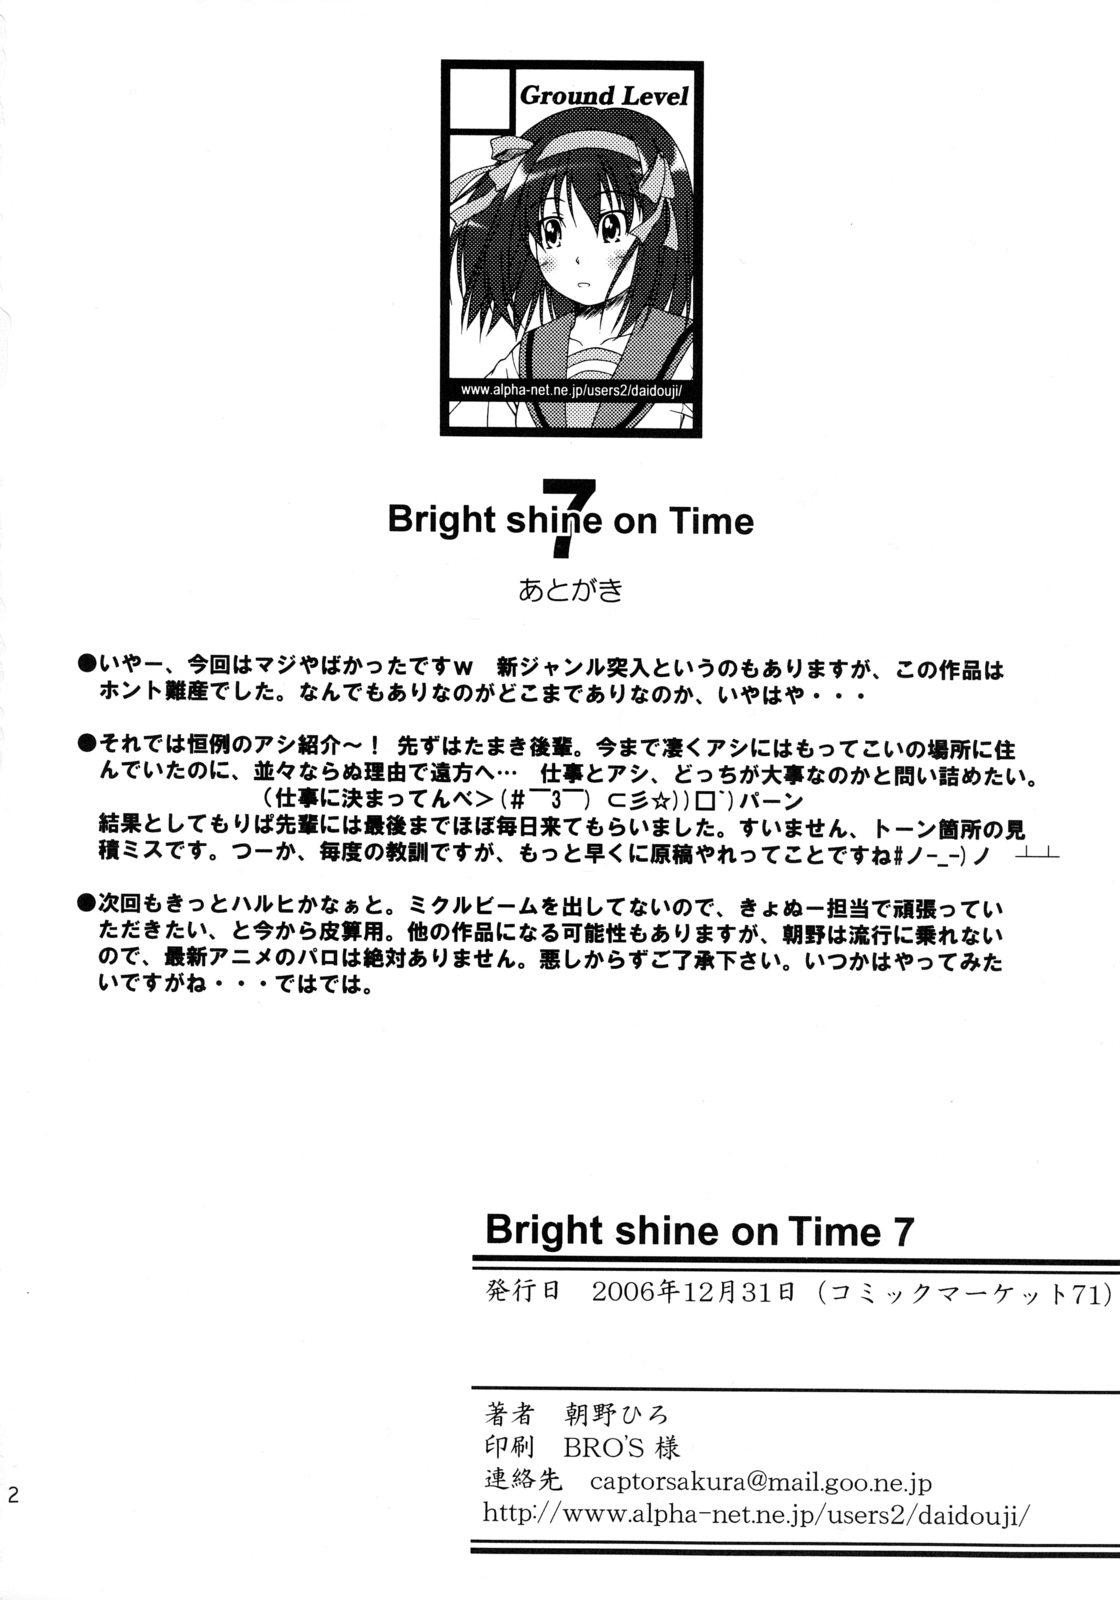 Bright shine on Time 7 21